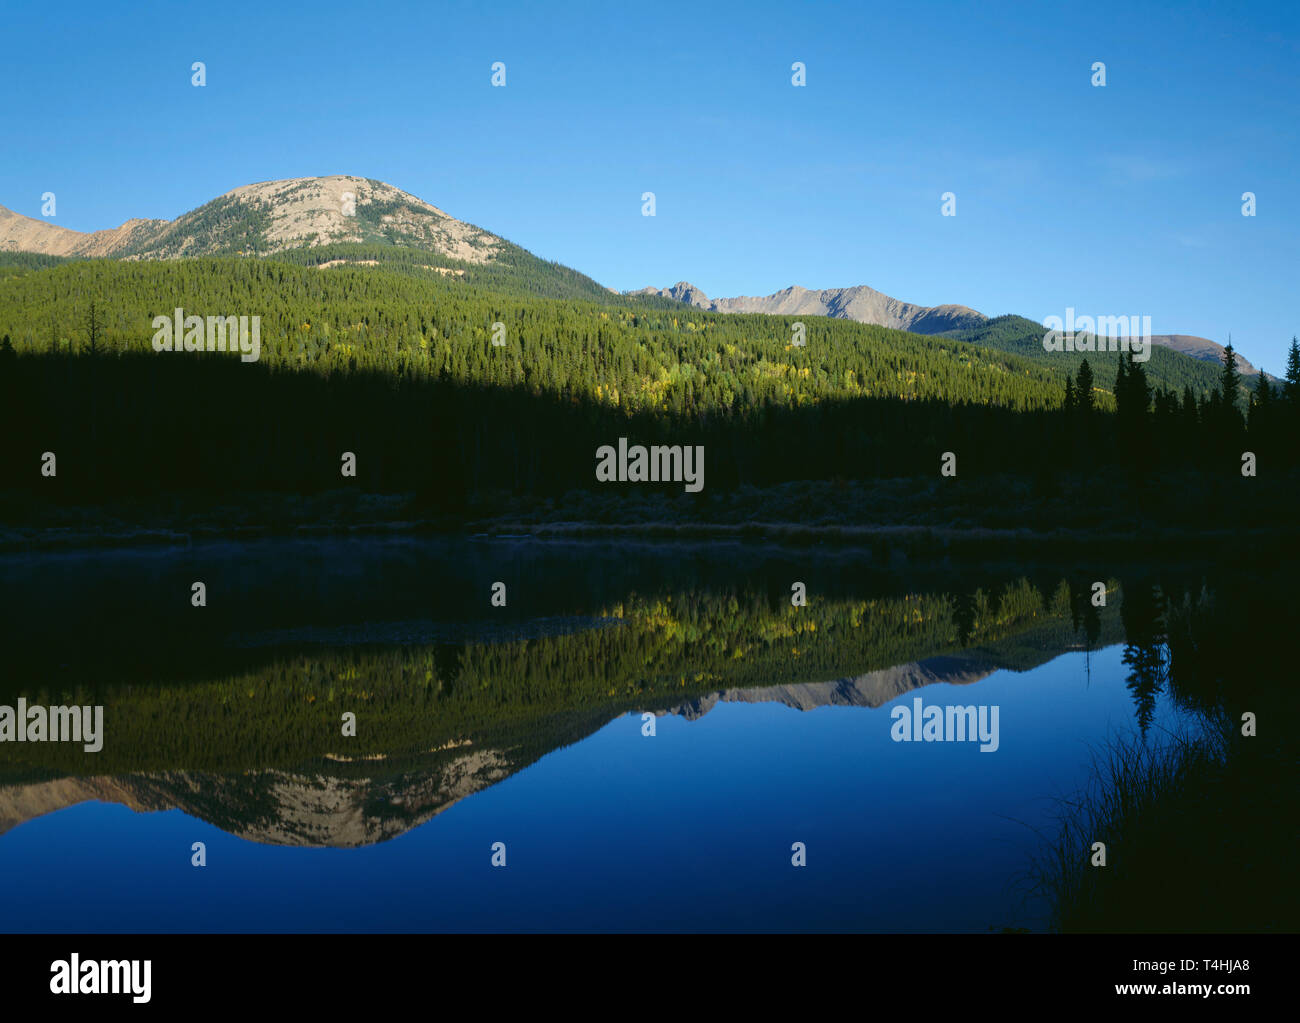 USA, Colorado, Rocky Mountain National Park, Beaver Ponds in the North Fork of the Colorado River Valley reflect peaks of the Never Summer Range. Stock Photo